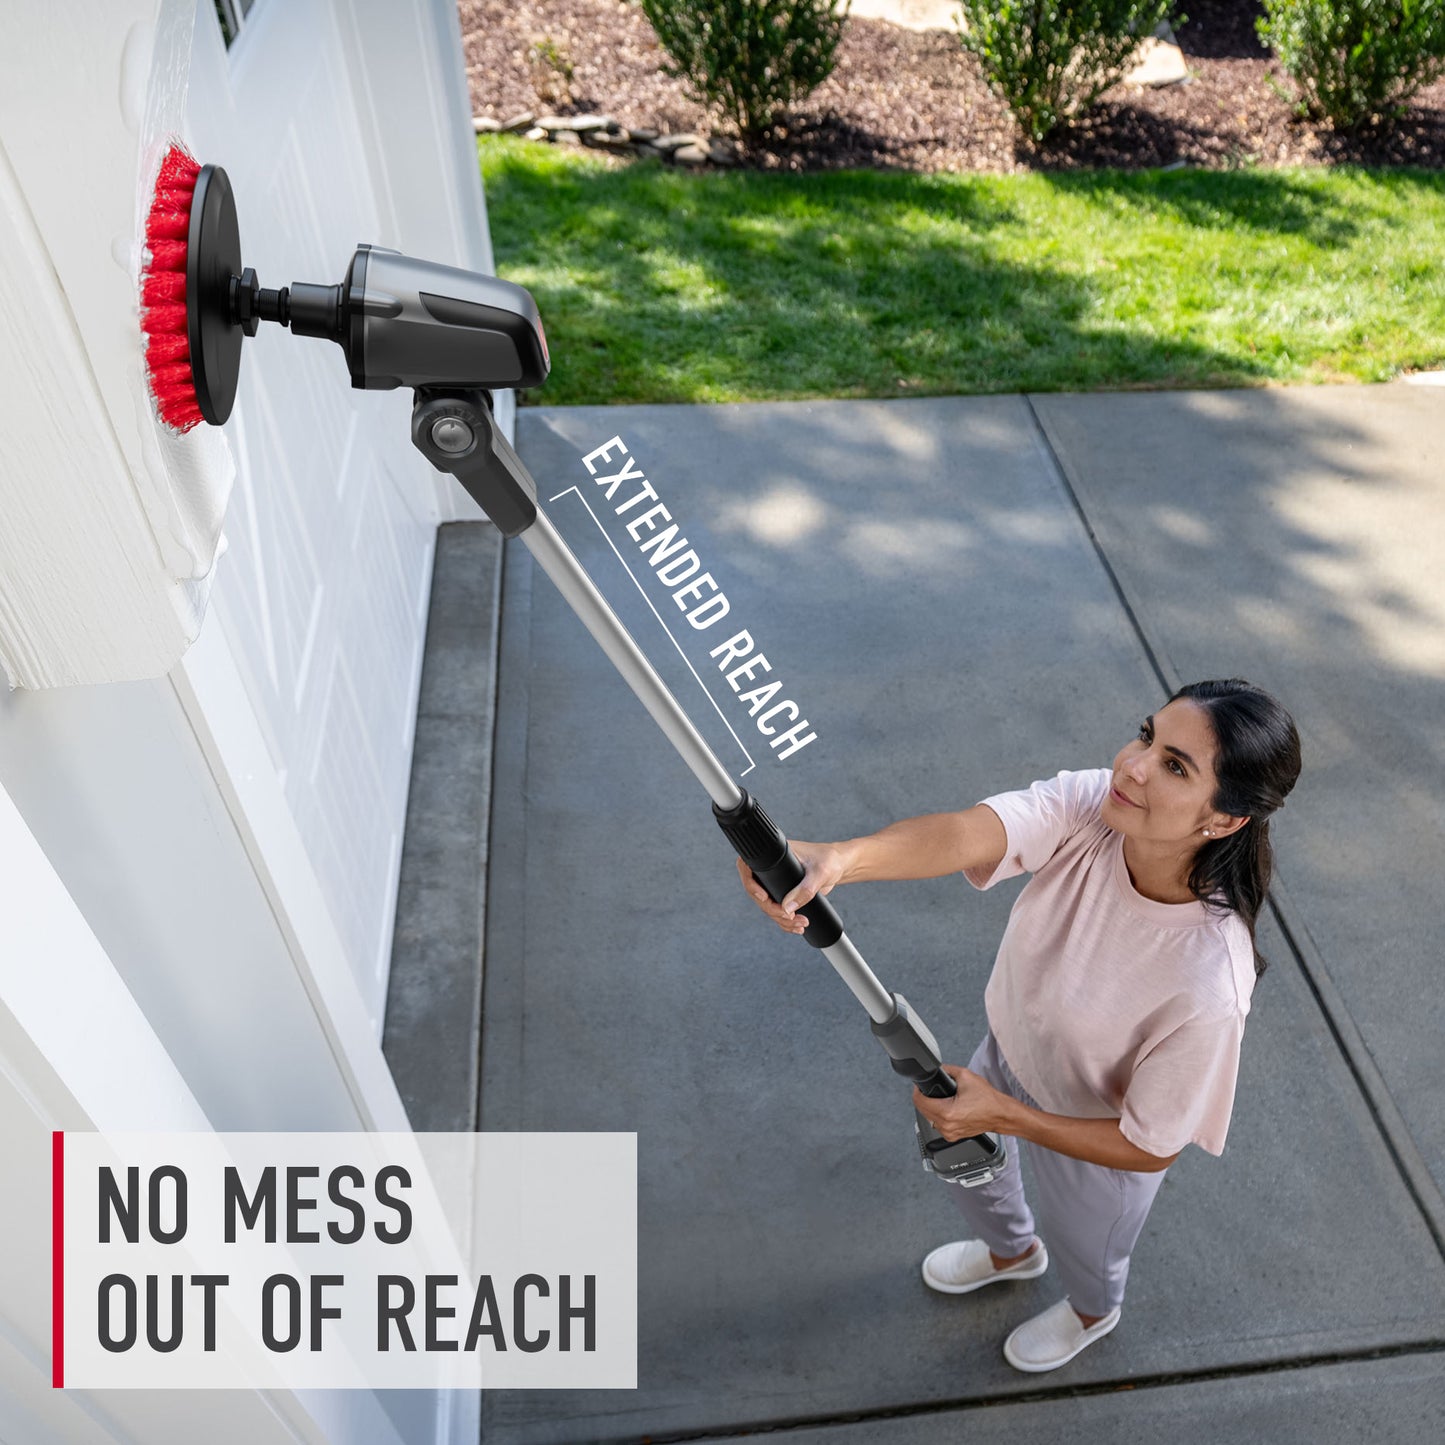 ONEPWR EXTENDED CORDLESS SCRUBBER